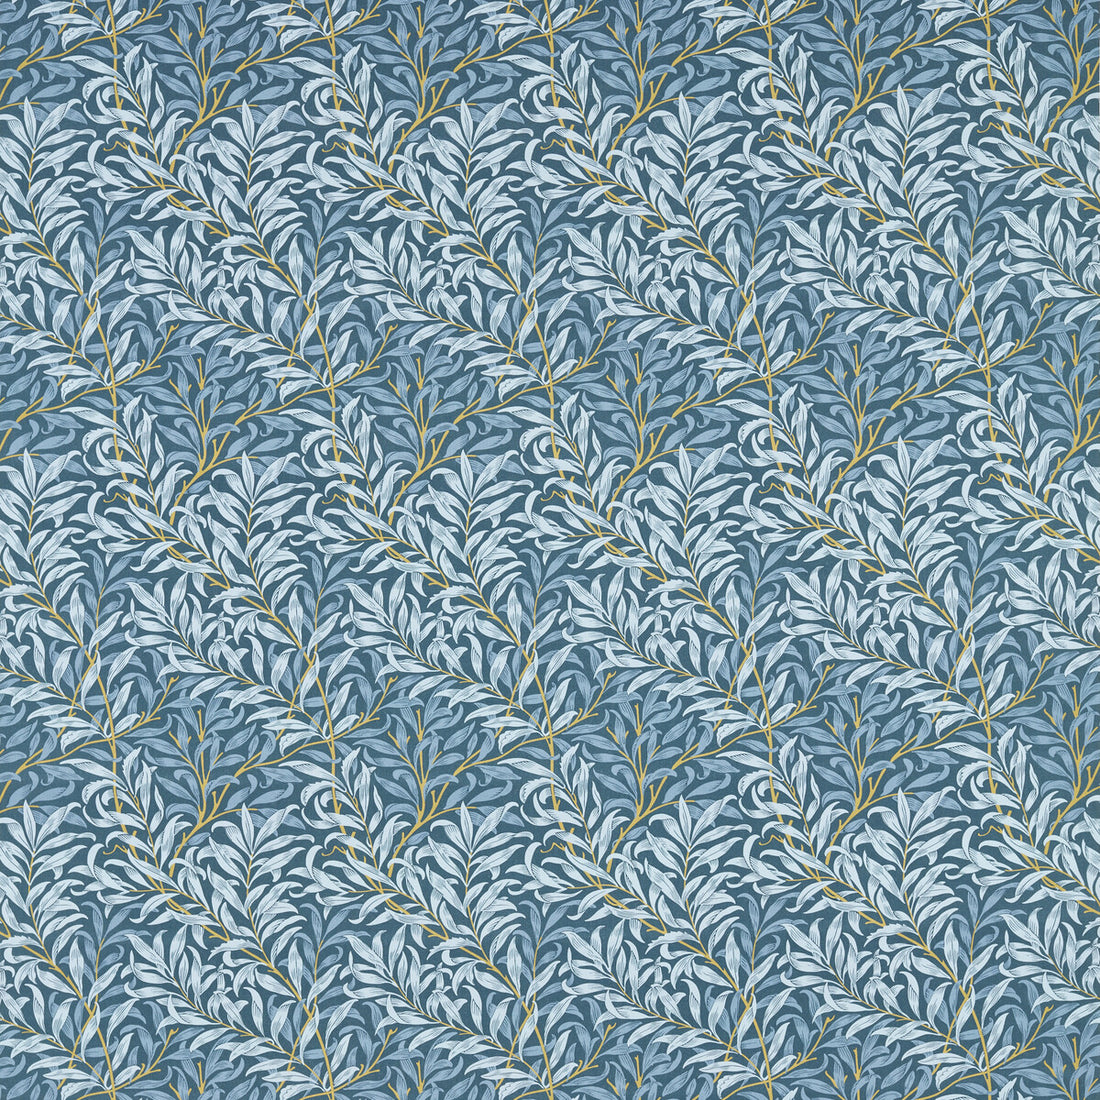 Willow Boughs fabric in denim color - pattern F1679/01.CAC.0 - by Clarke And Clarke in the Clarke &amp; Clarke William Morris Designs collection